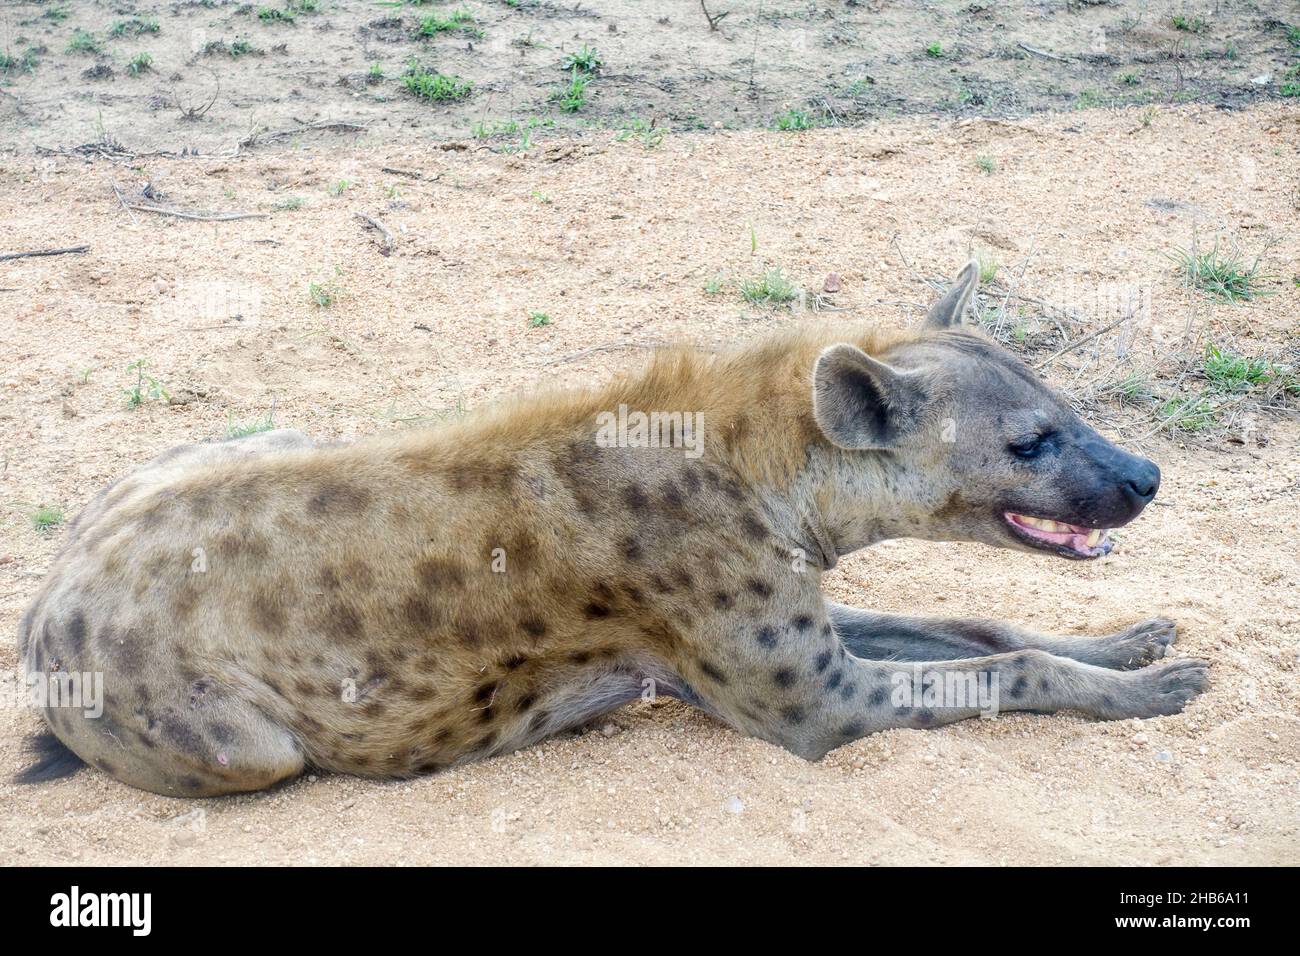 Close-up of a Hyena in the Kruger National Park, South Africa Stock Photo